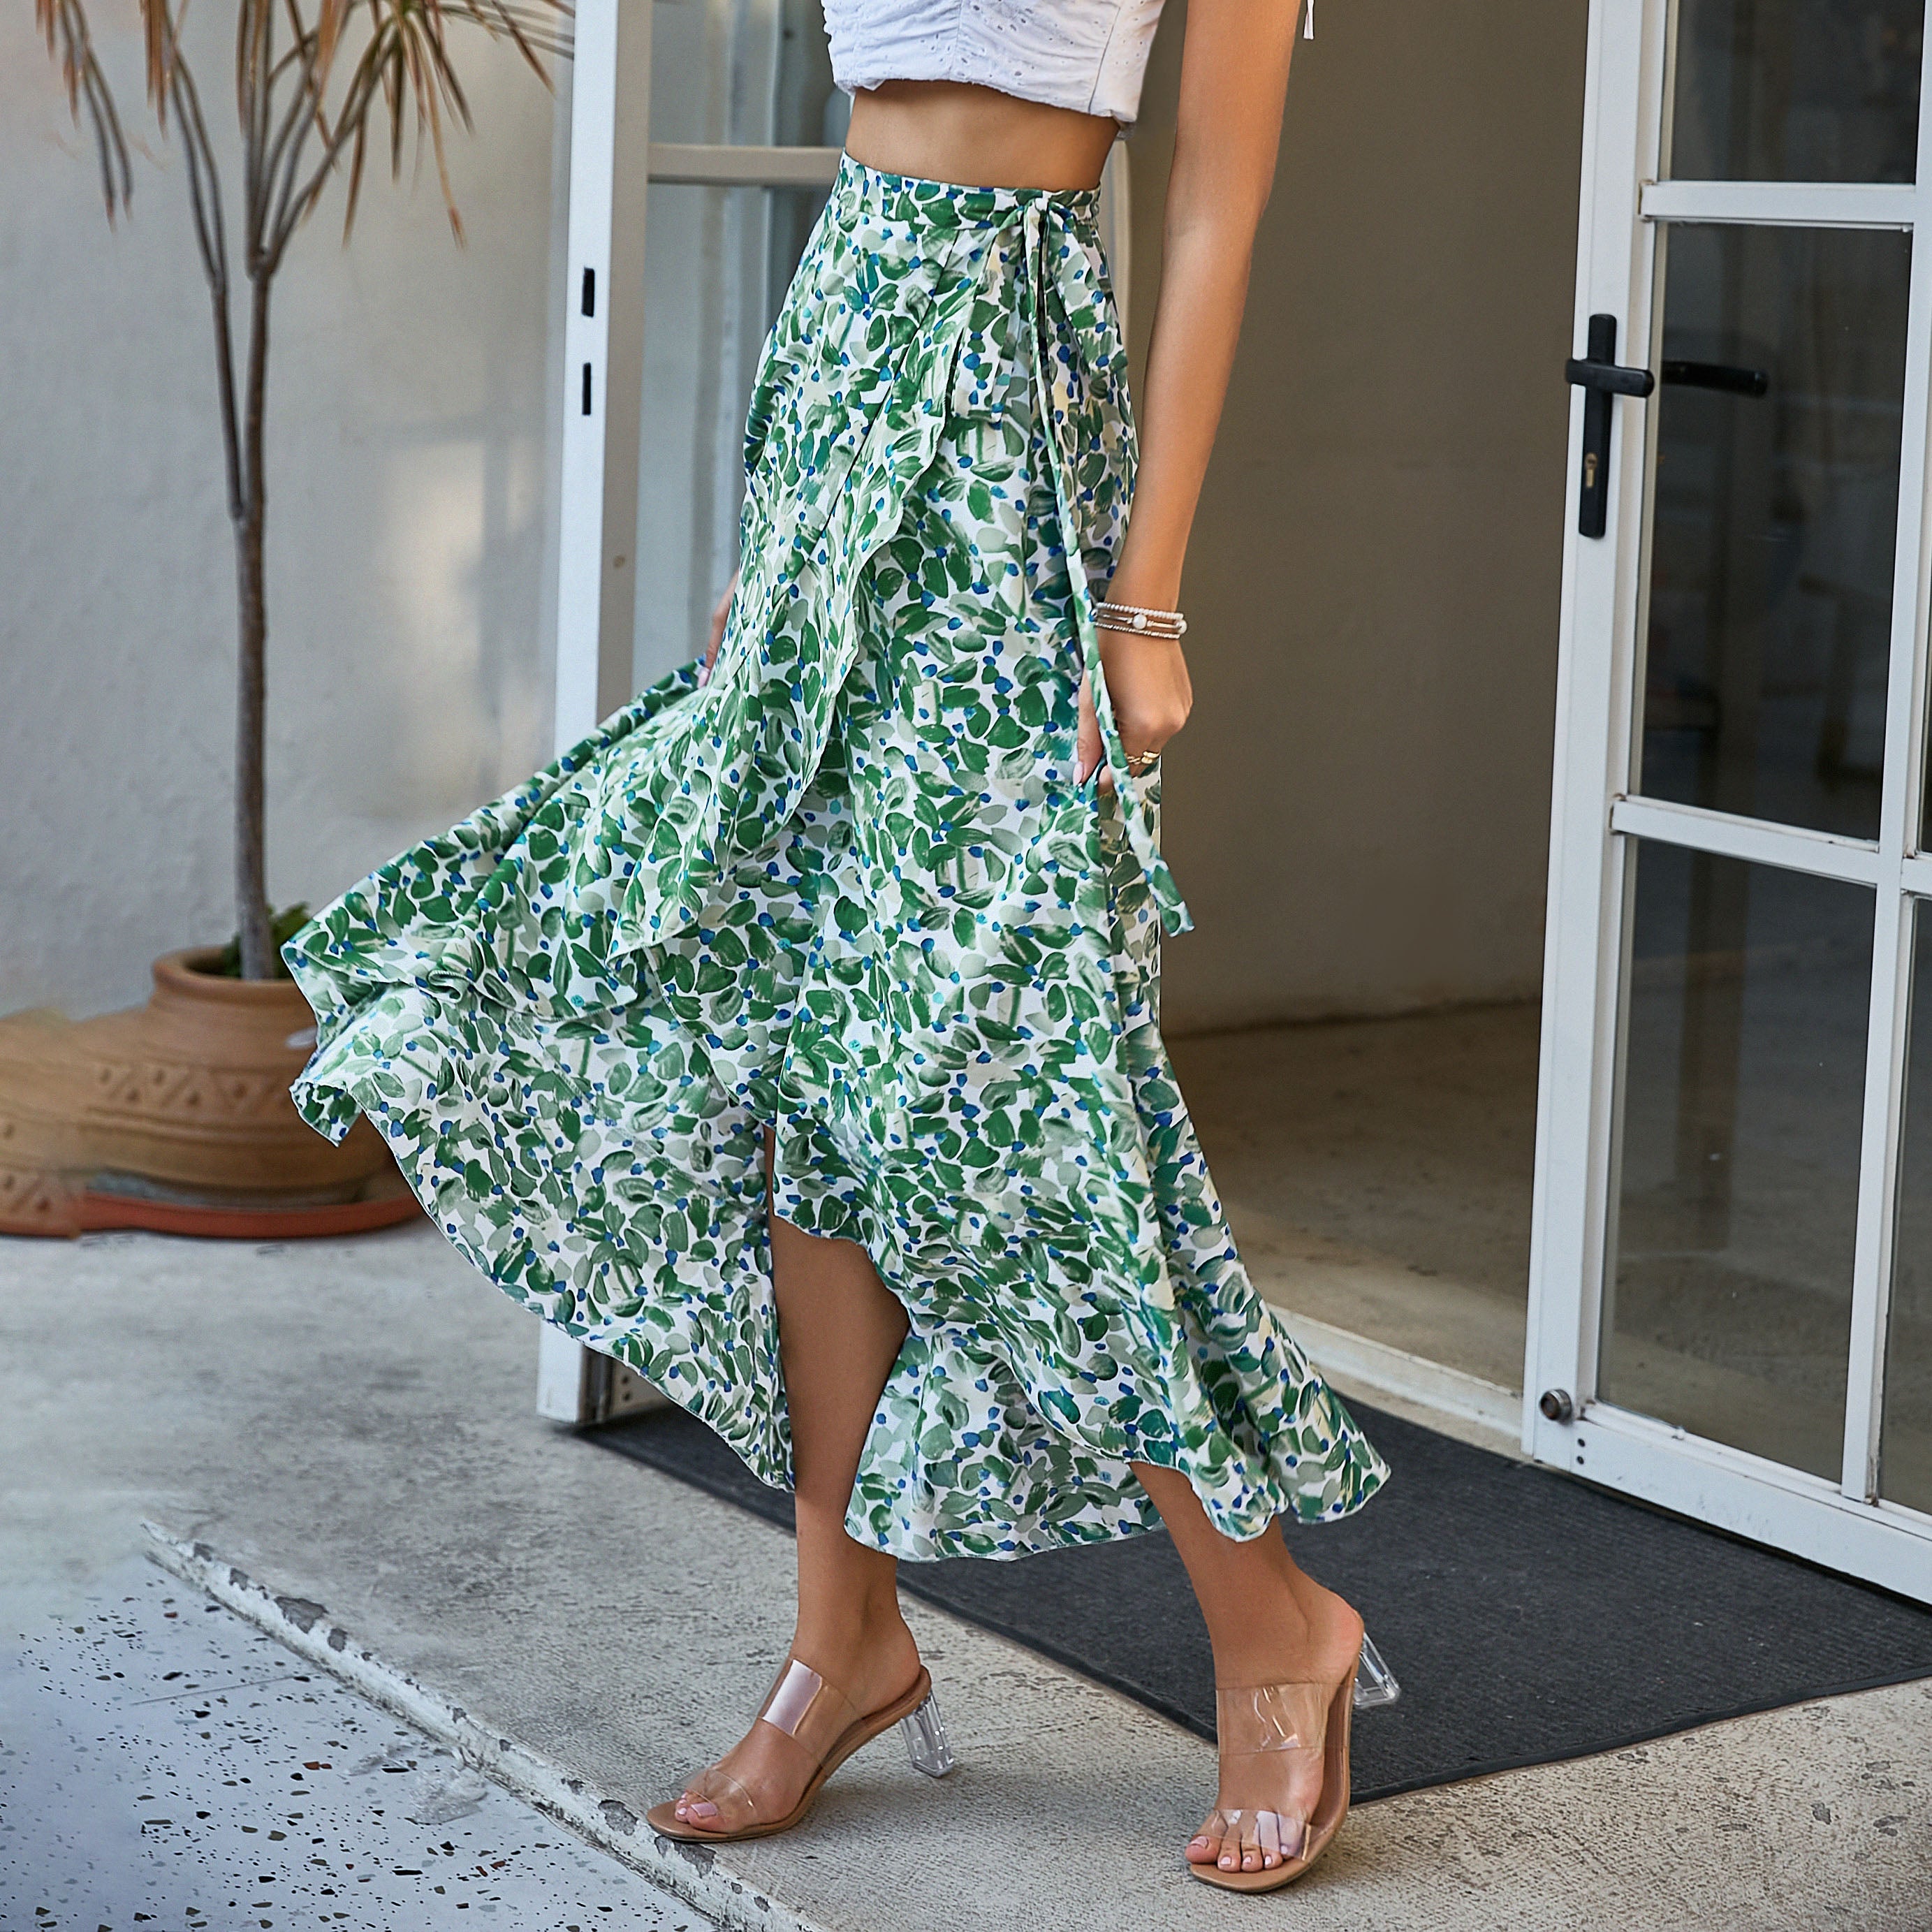 GypsyLady Floral Maxi Wrap Skirt Sashes Belted Green Summer Long Skirt Women Casual Boho Split Sexy Ladies Beach Woman Skirts